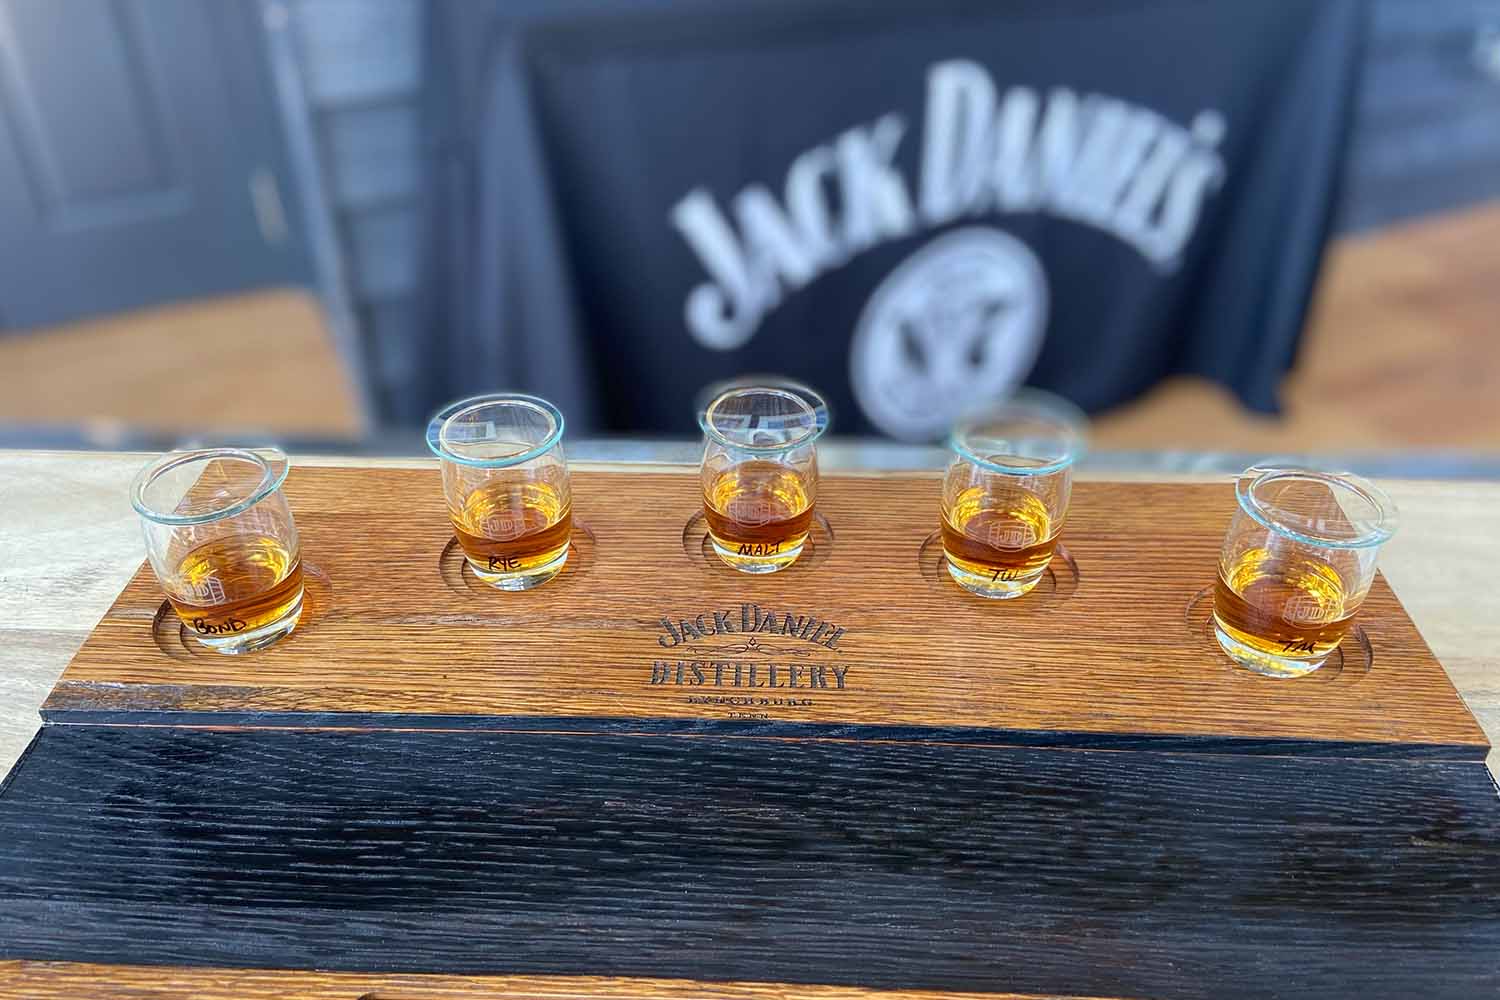 Tastes of new whiskey expressions from Jack Daniel's, circa 2022